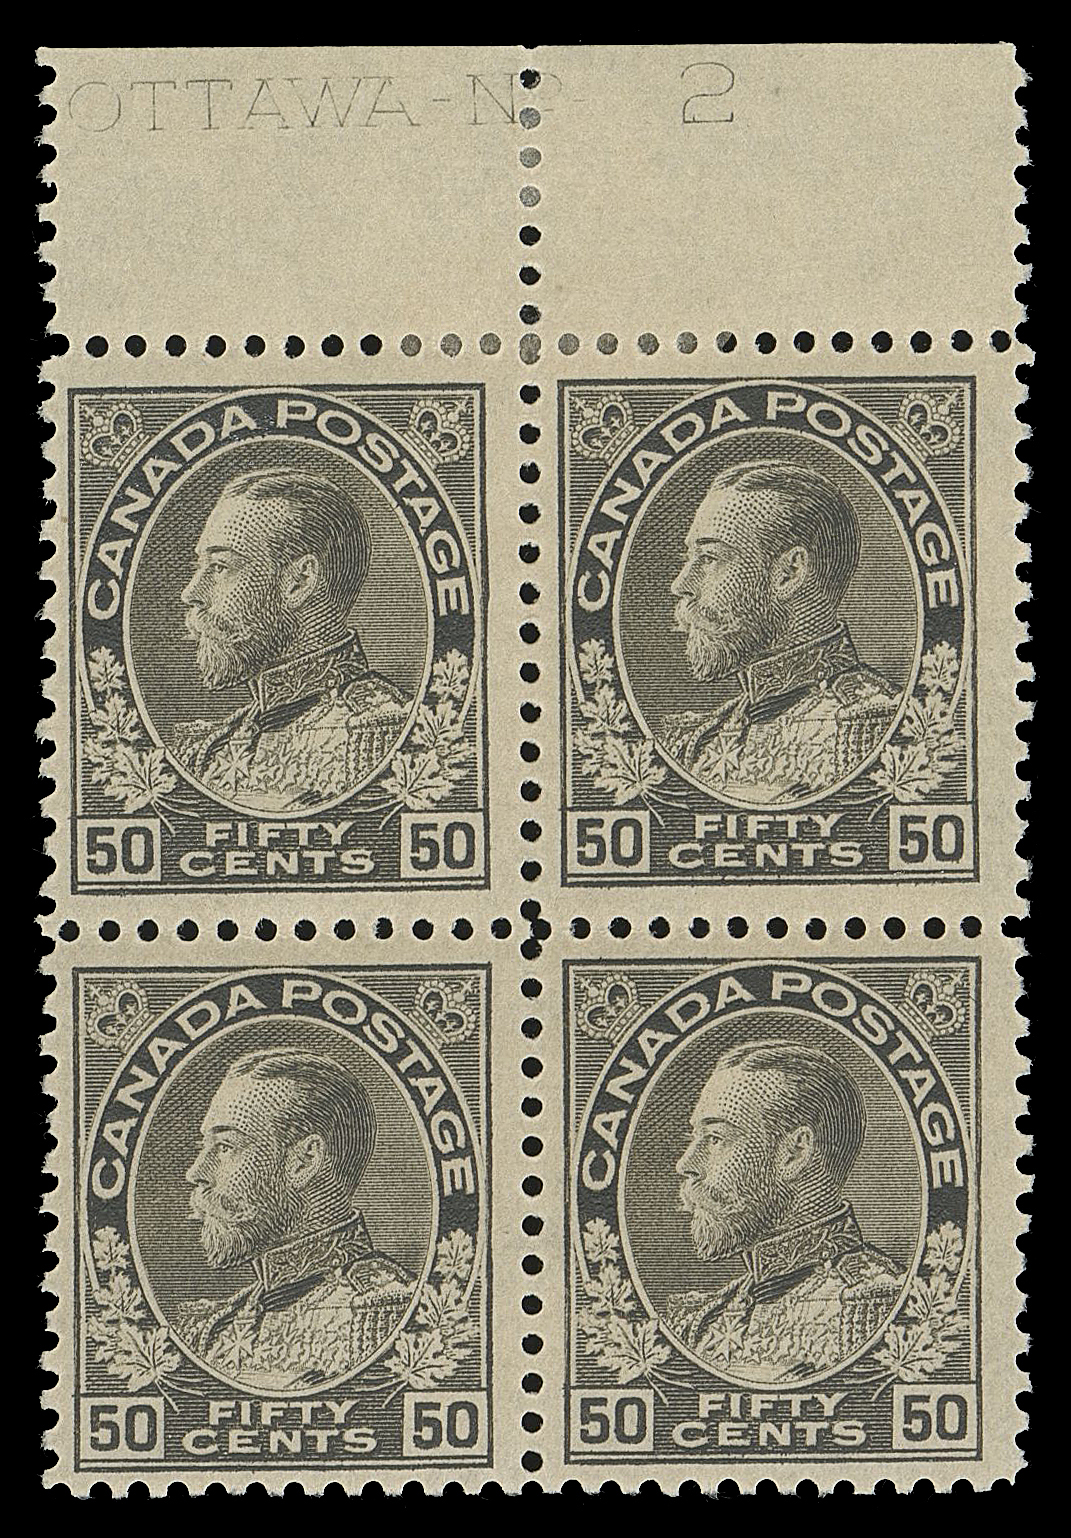 ADMIRAL STAMPS  120i,A very rare Plate 2 block displaying the distinctive late stage of the plate known as the silver black shade, hinged in selvedge just touching top pair otherwise pristine original gum with lower pair NH. Only six Plate 2 blocks (of any shade, and none larger) are reported in Glen Lundeen